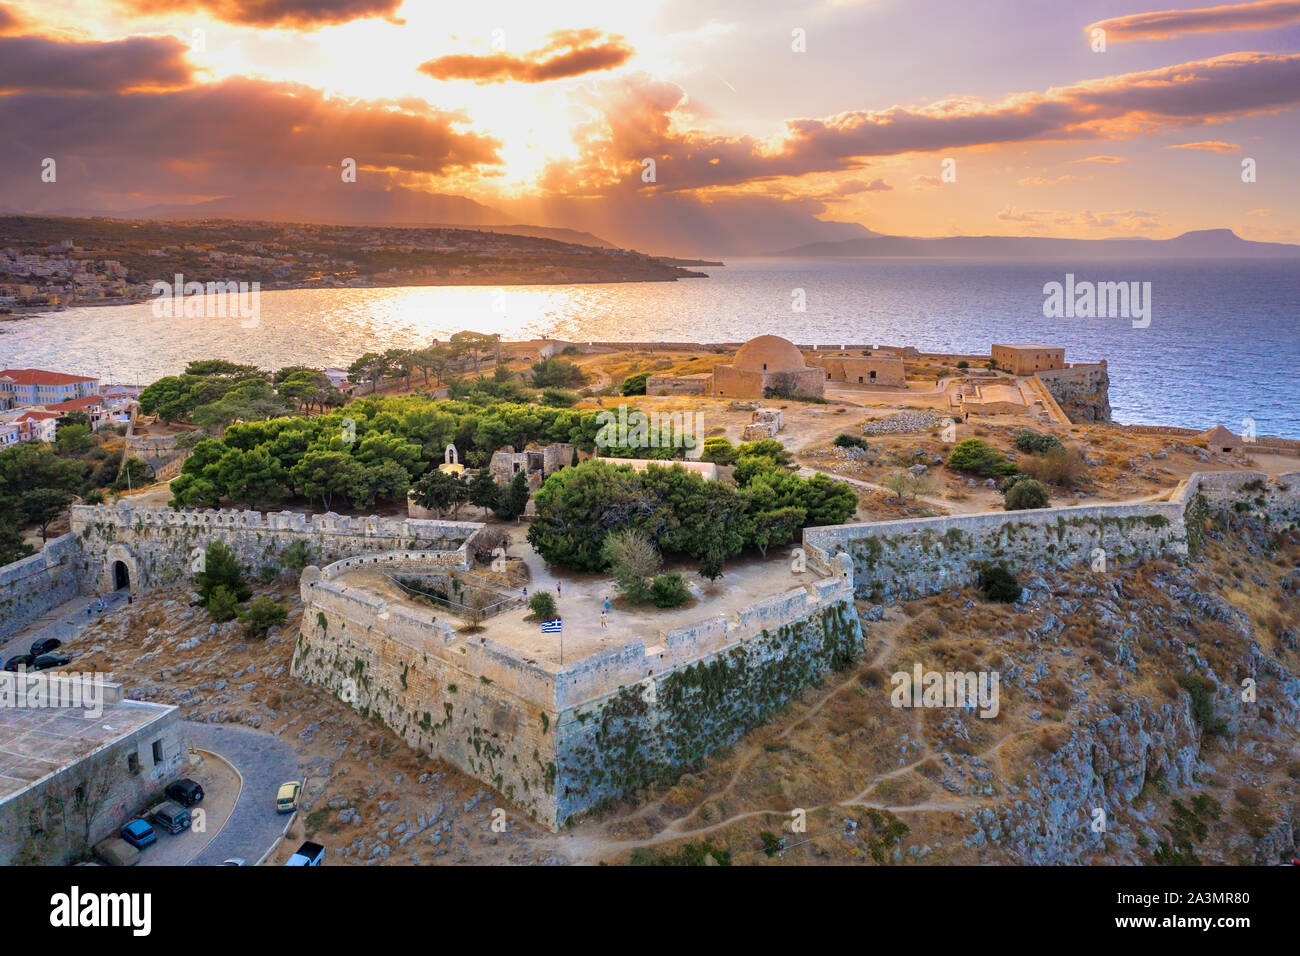 View of the Venetian castle on top of the hill, with perspective road at sunset Rethymno, Crete, Greece Stock Photo